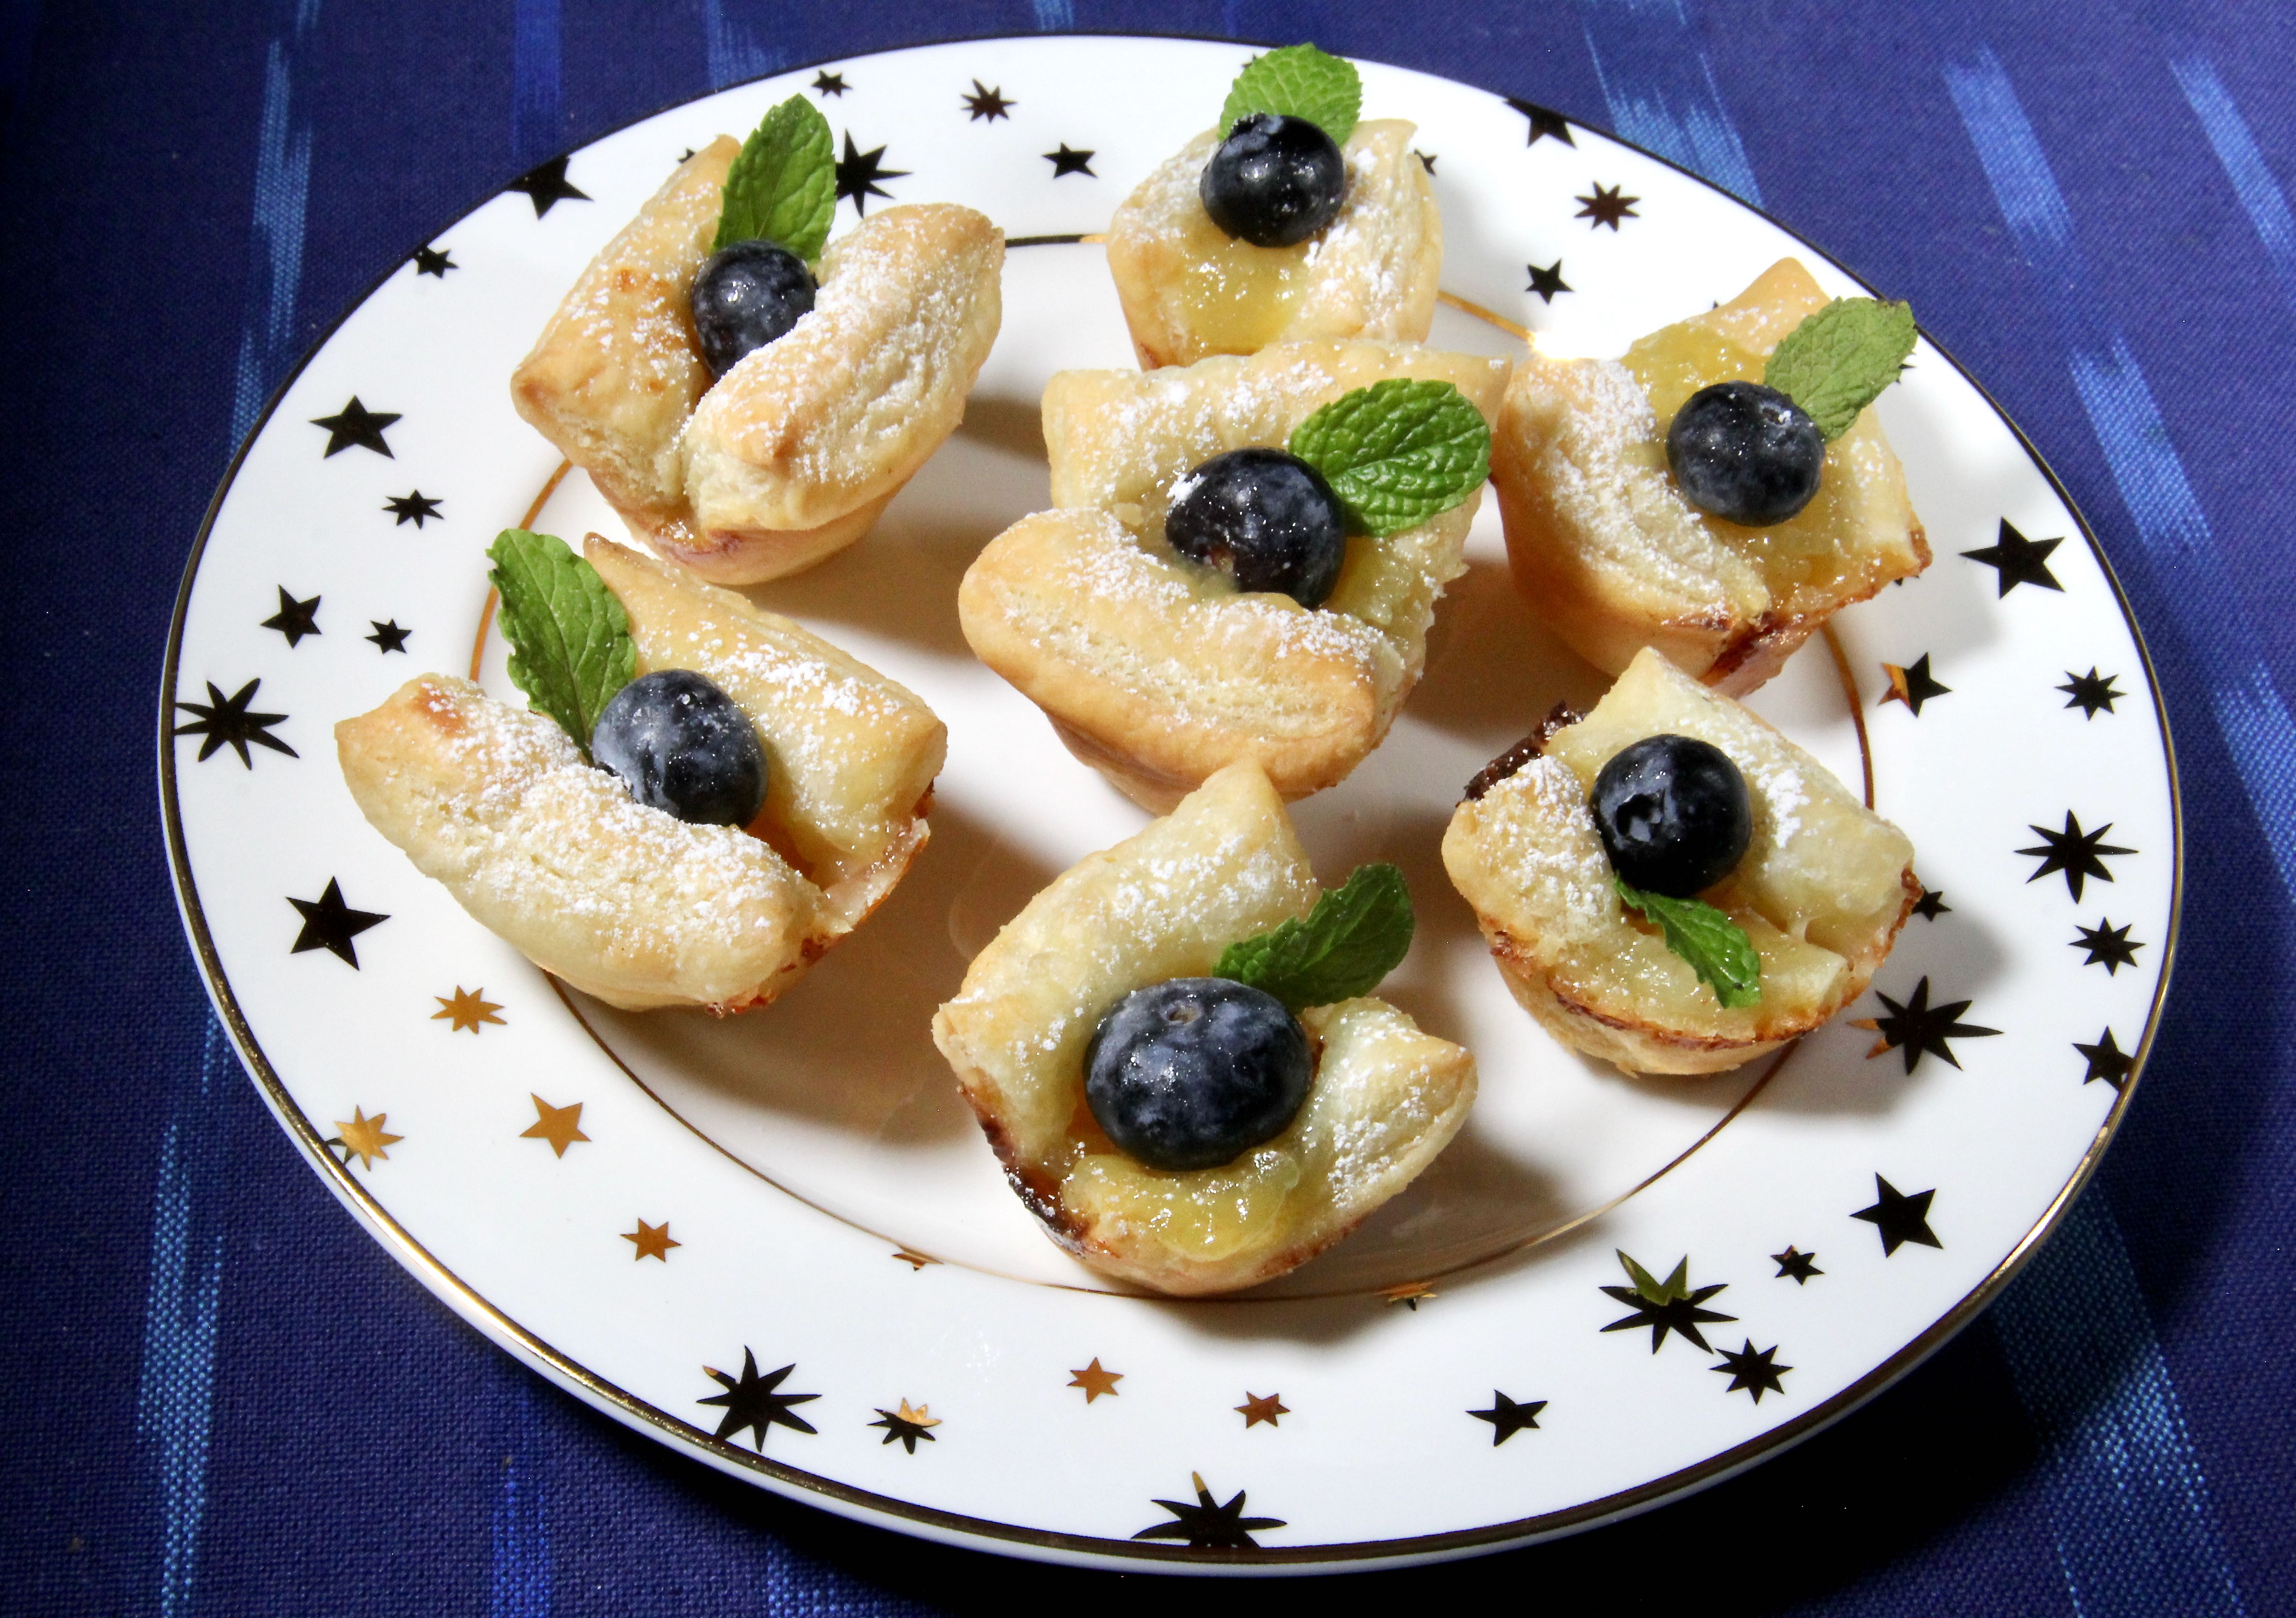 Brie, Lemon Curd, and Blueberry Bites lutzflcat